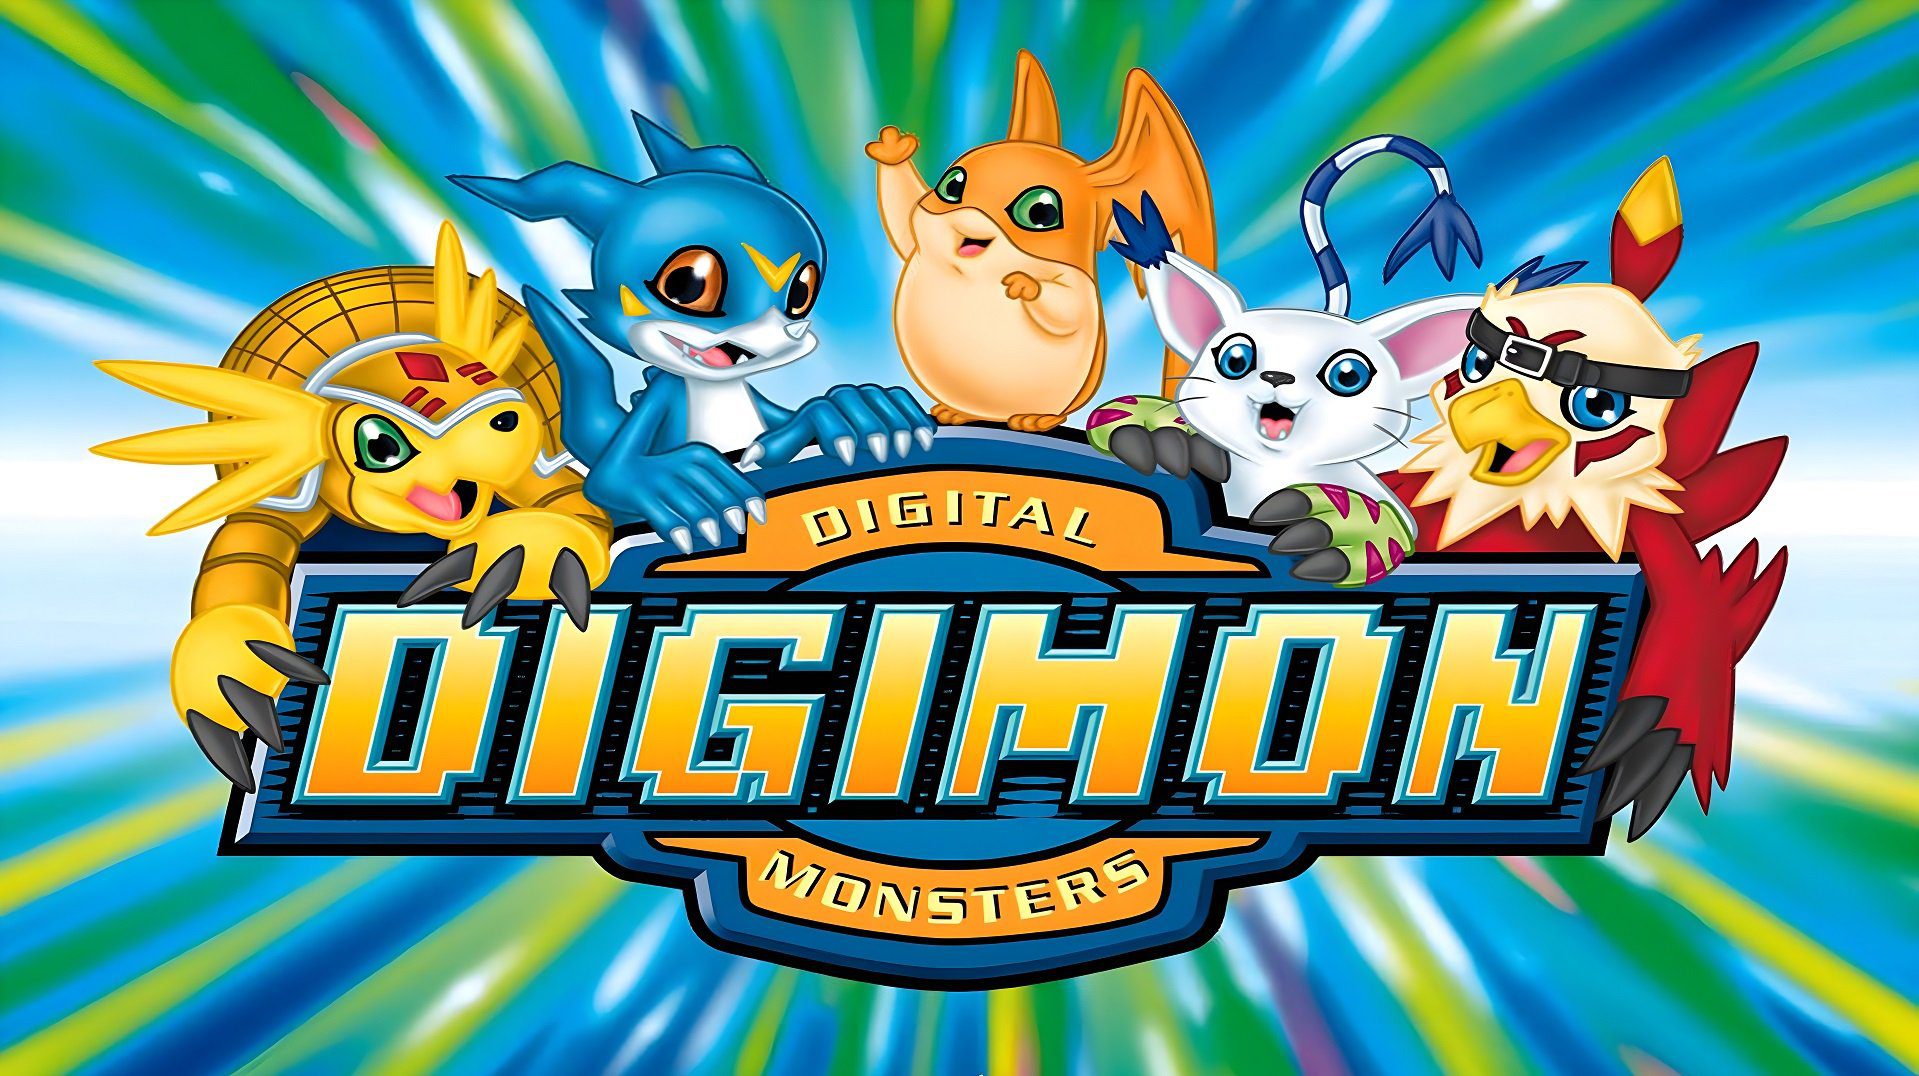 Top five Digimon games of all time